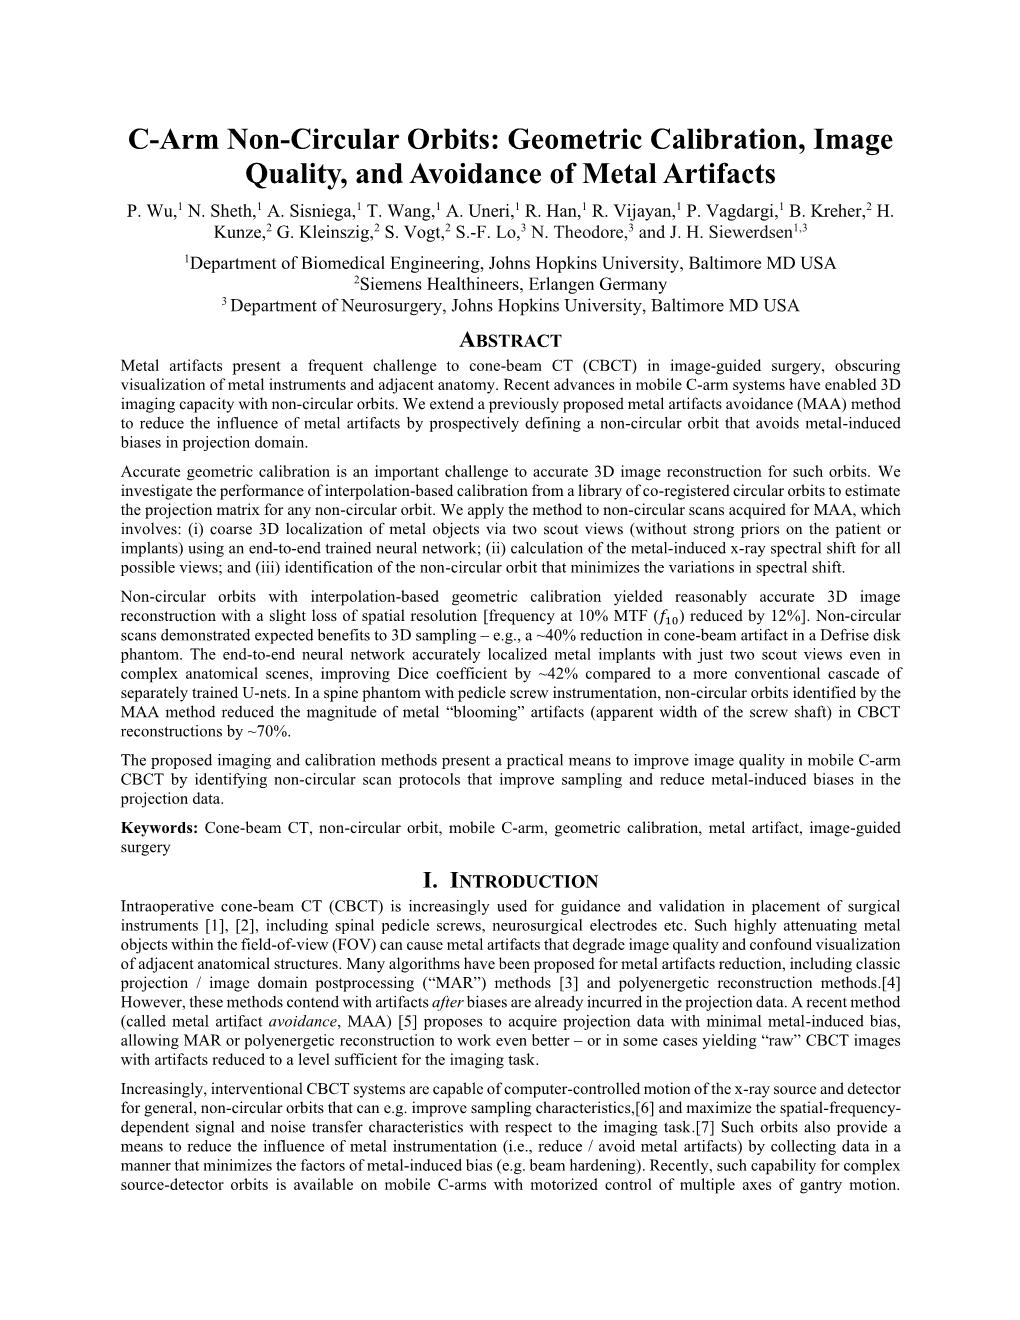 C-Arm Non-Circular Orbits: Geometric Calibration, Image Quality, and Avoidance of Metal Artifacts P